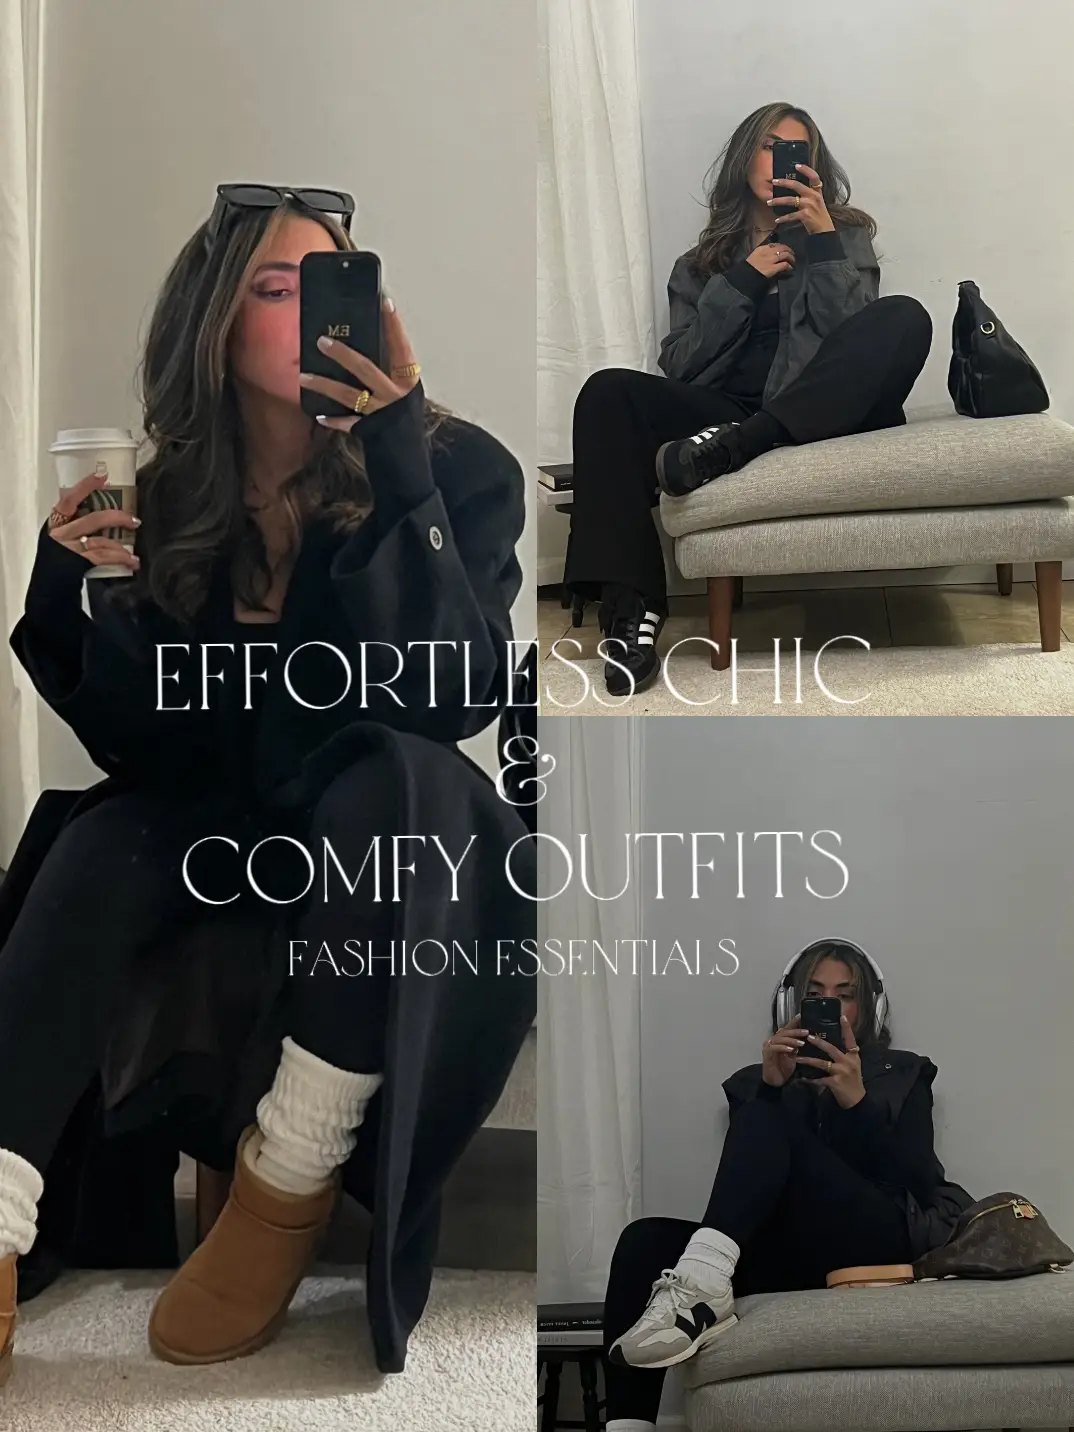 EFFORTLESS AND COMFY OUTFITS, Fashion Essentials